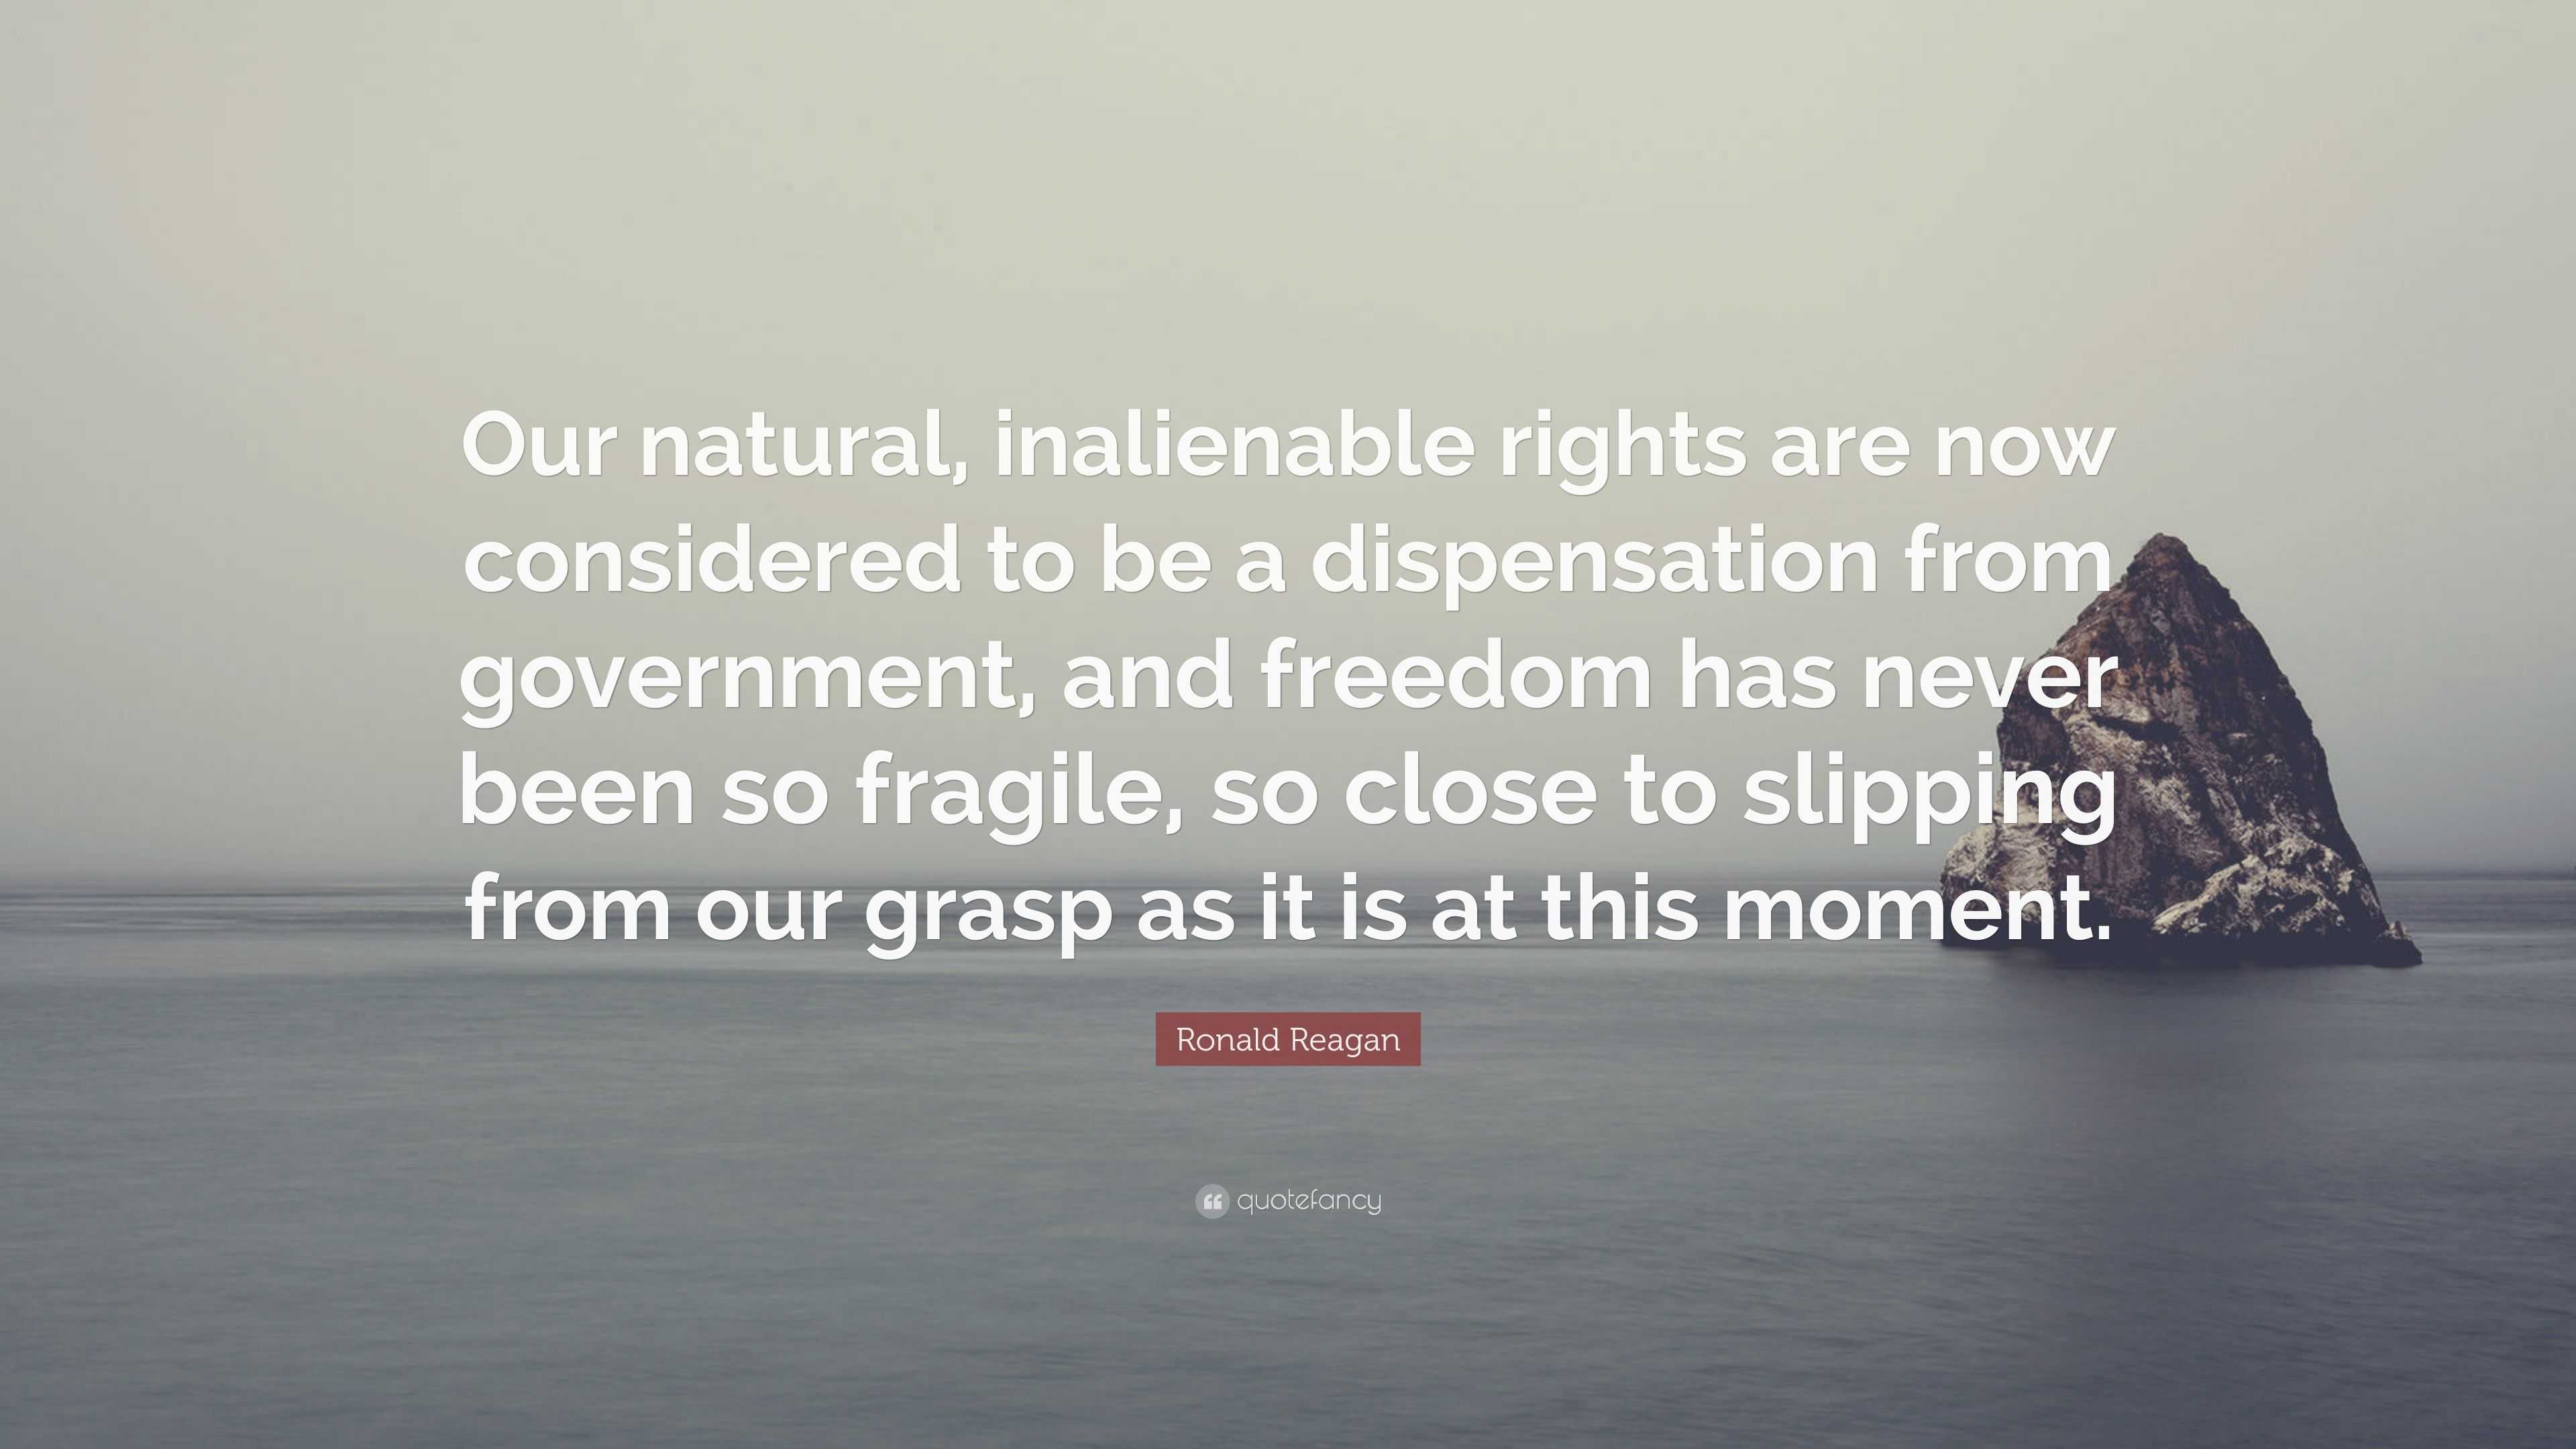 Ronald Reagan Quote: “Our natural, inalienable rights are now ...